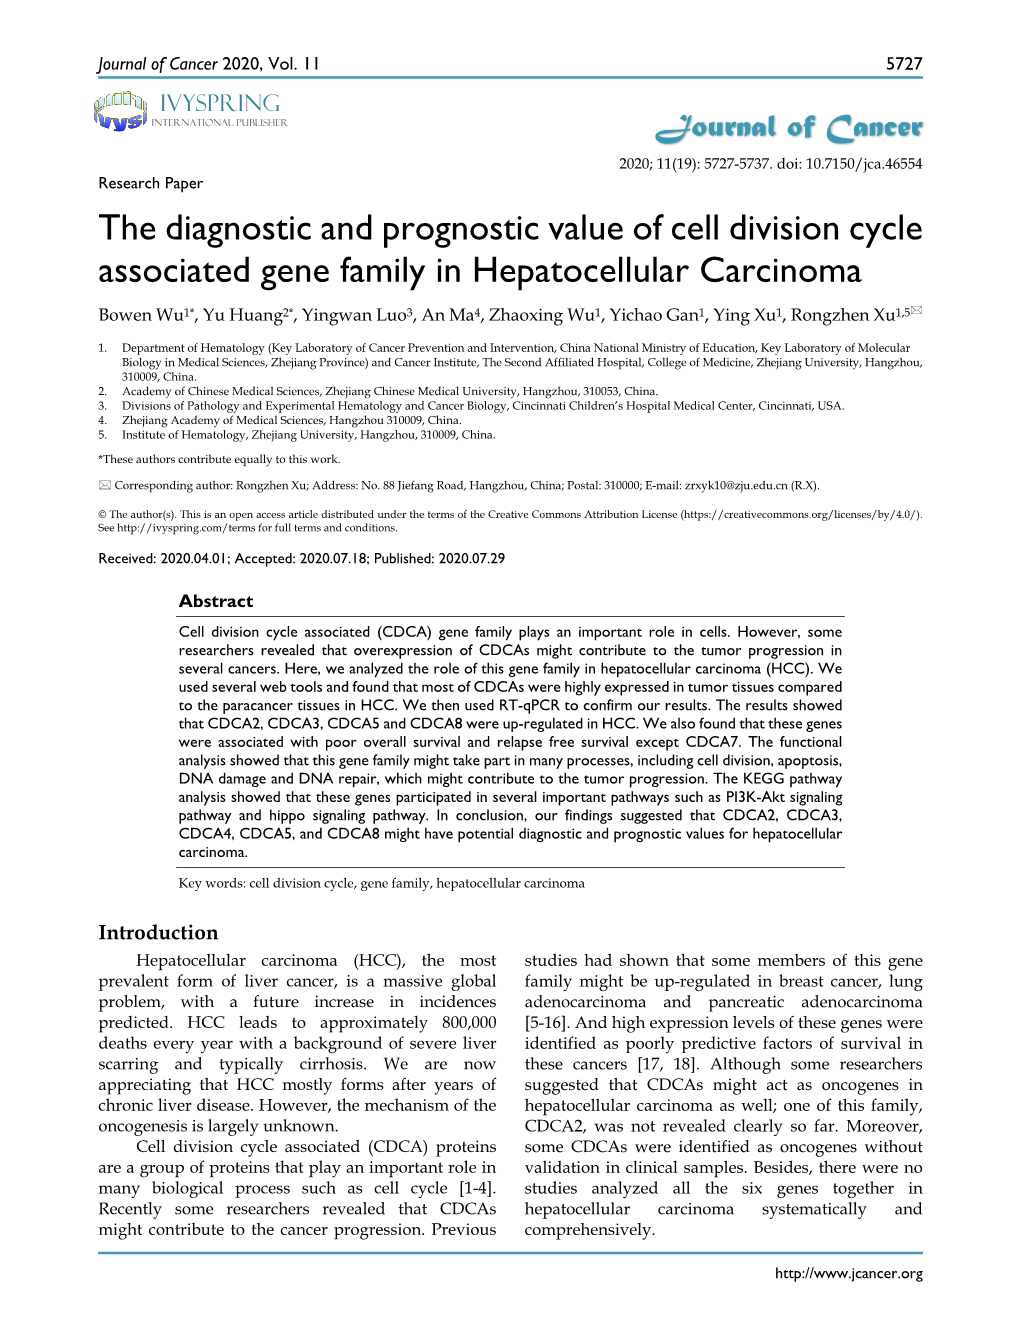 The Diagnostic and Prognostic Value of Cell Division Cycle Associated